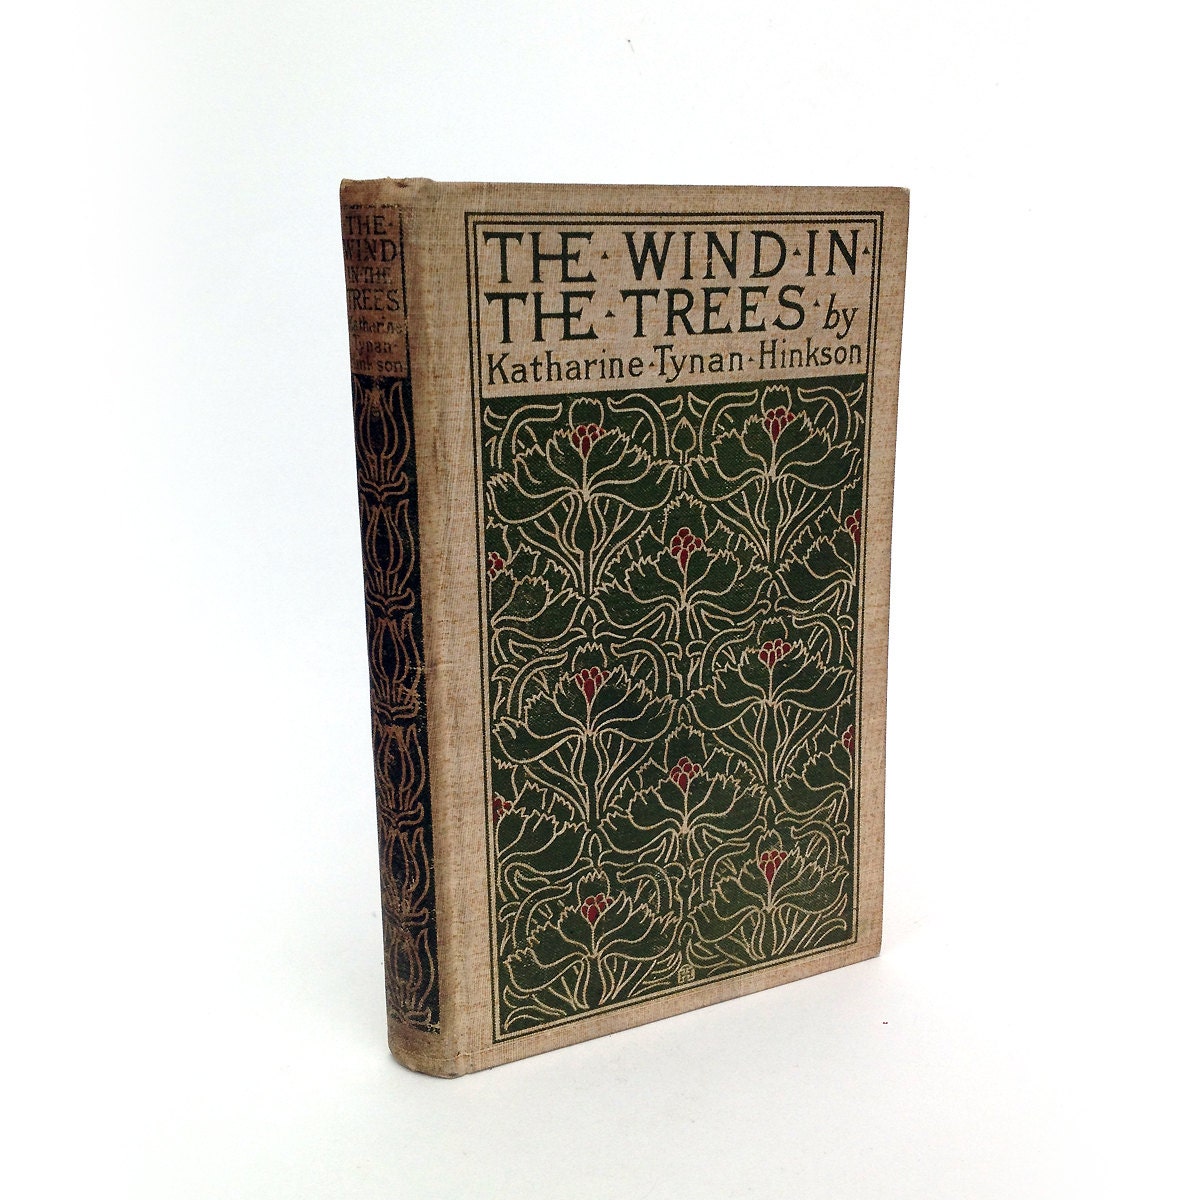 Antique poetry book, The WInd in the Trees by Katharine Tynan Hinkson, 1898 - VintageCuriosityShop